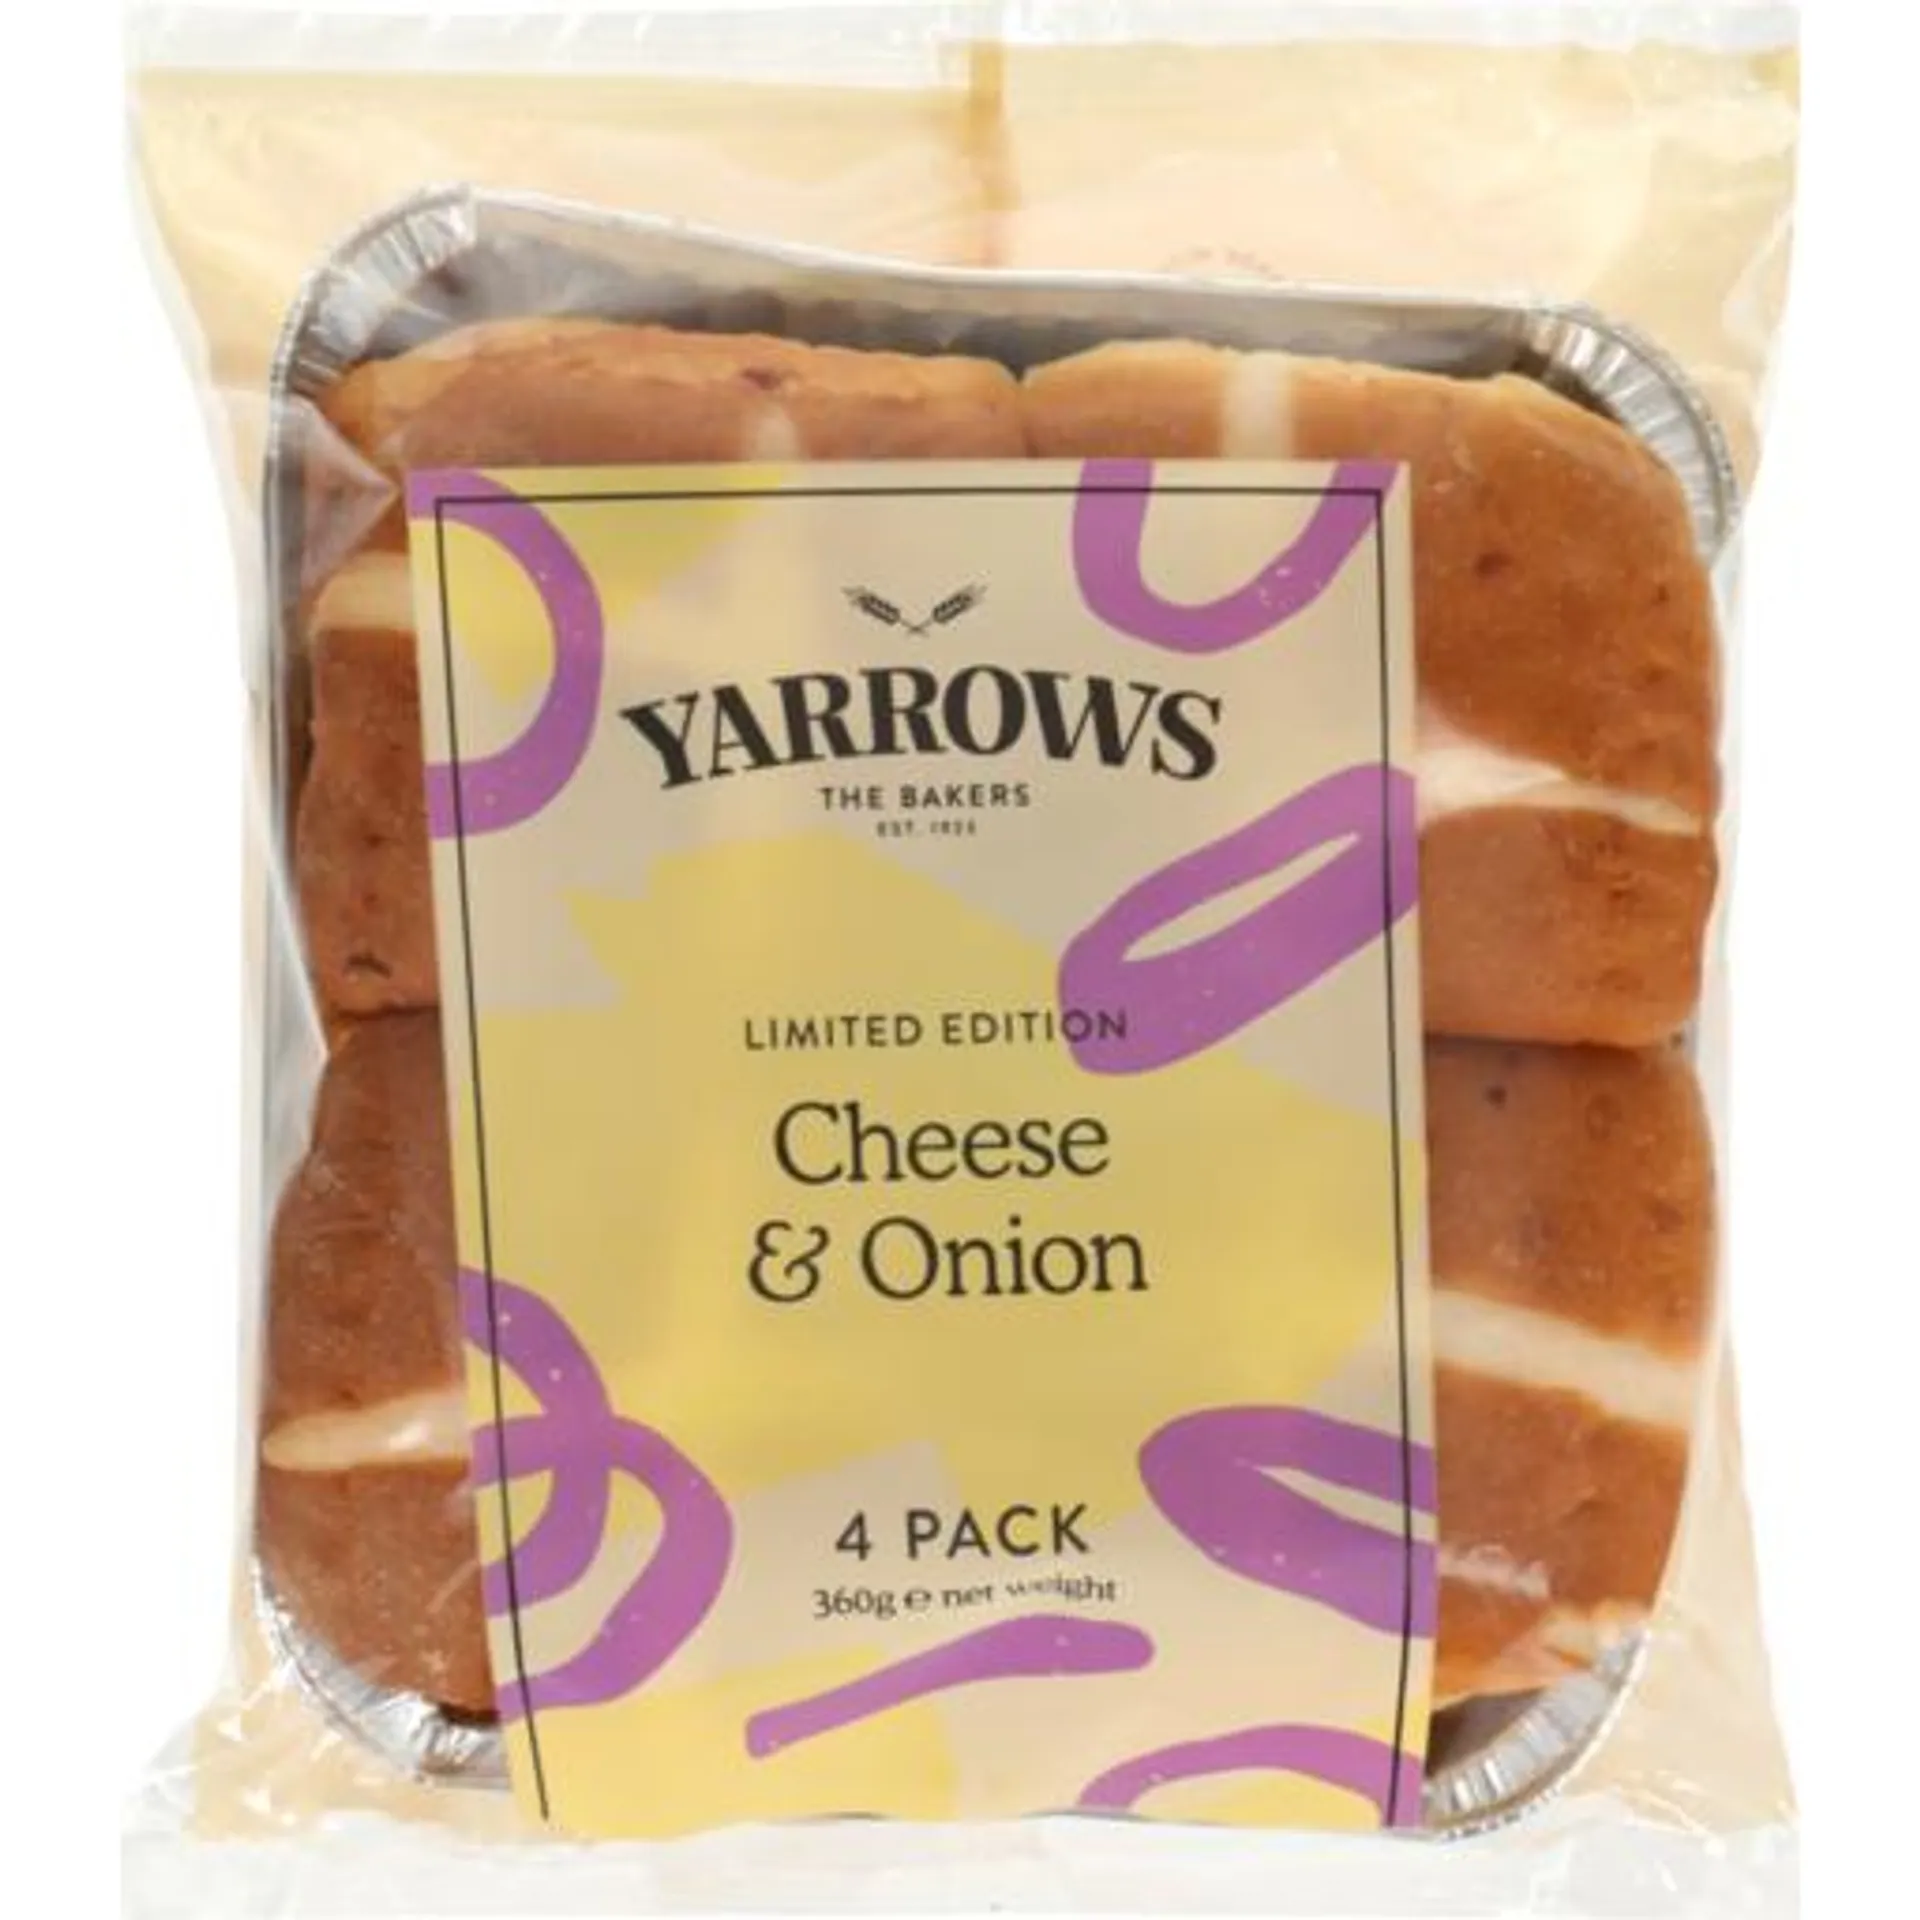 Yarrows Hot Cross Buns Cheese & Onion 4 Pack